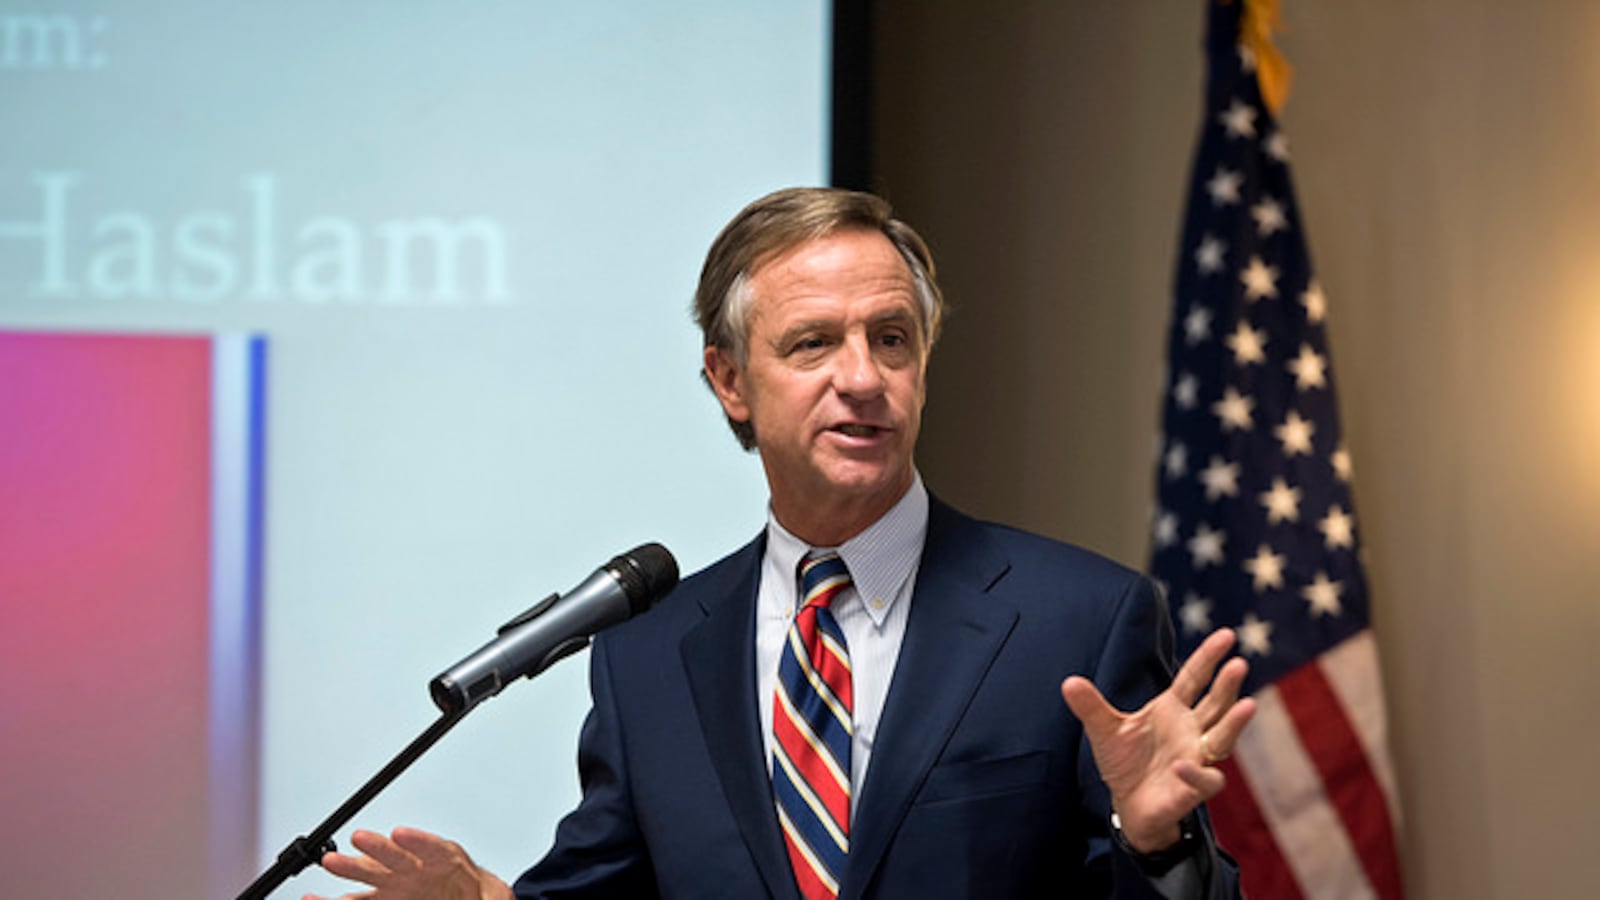 Gov. Bill Haslam is proposing spending an extra $30 million to improve student safety in Tennessee, both in schools and on school buses.